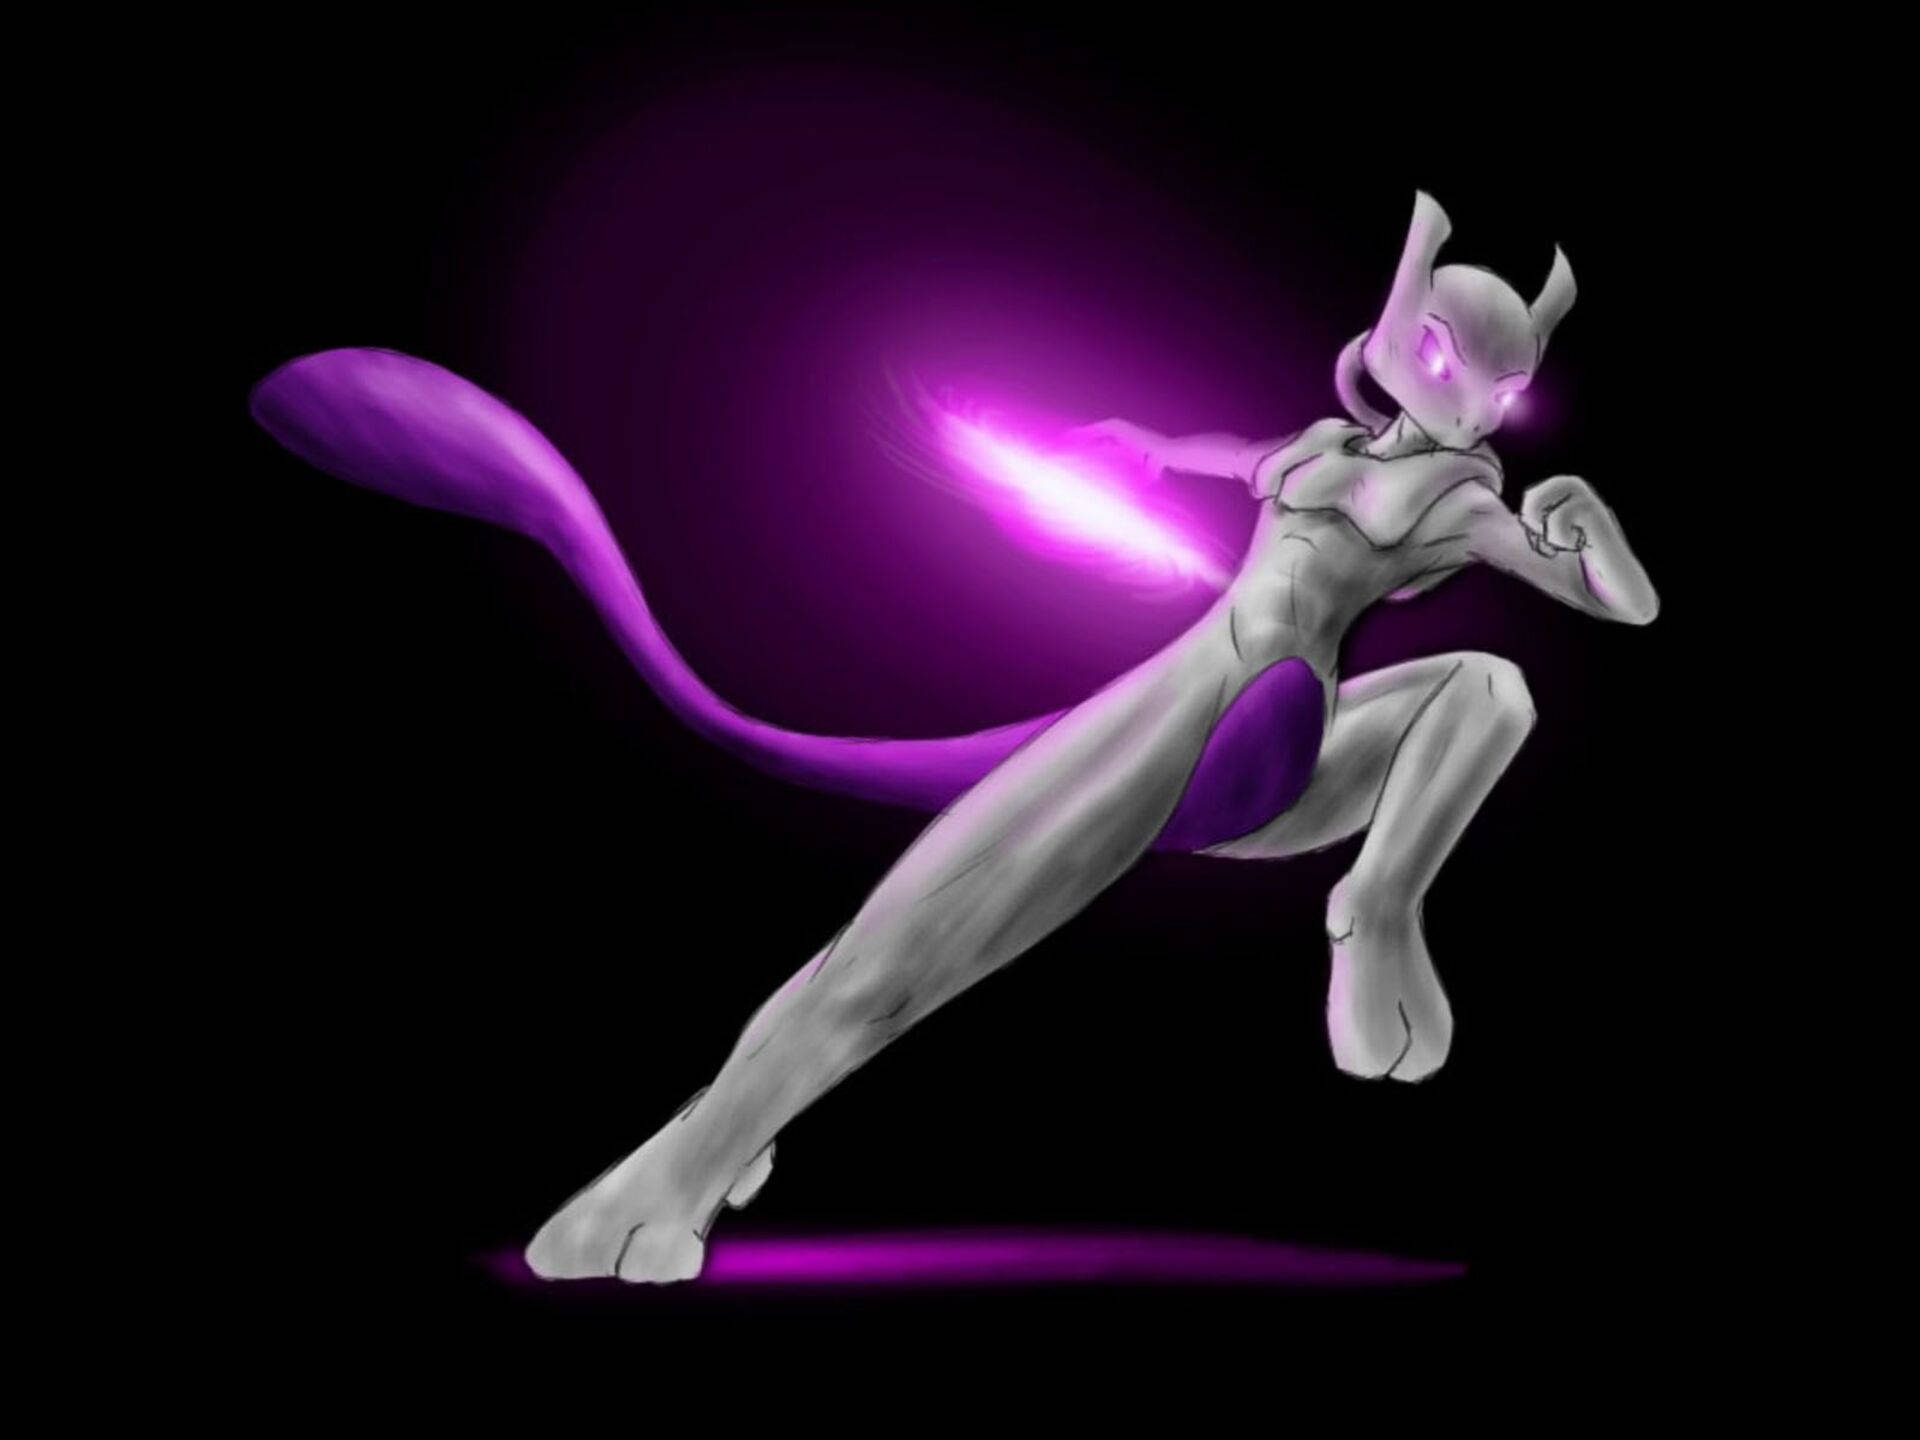 Pokemon Mewtwo In Action Background